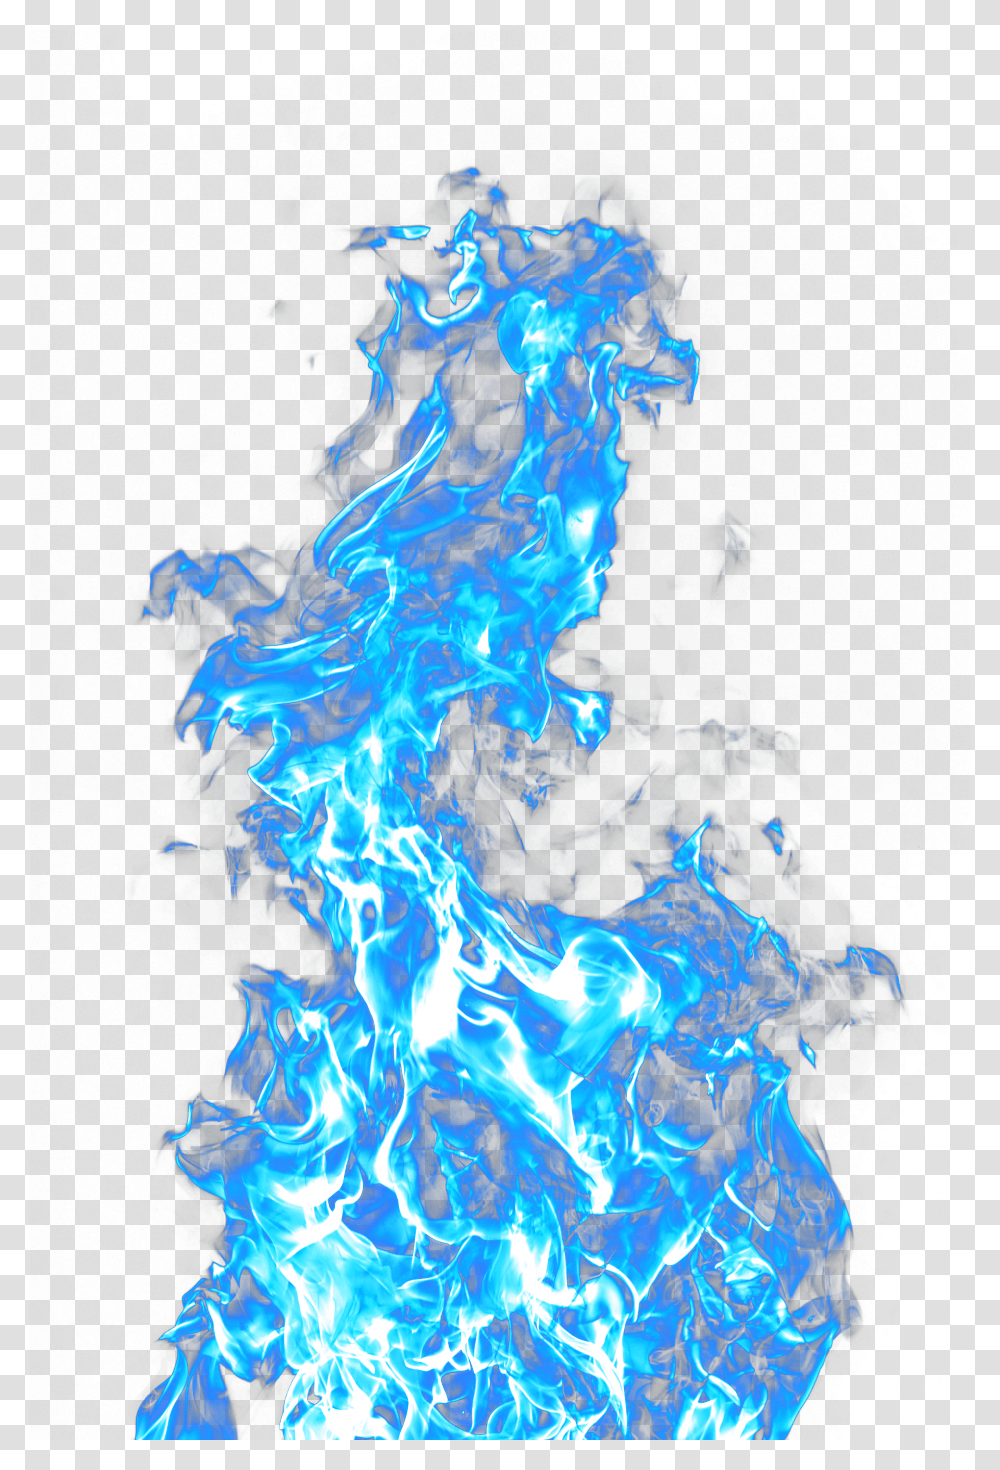 Beautiful Light Blue Flame File Hd Clipart Blue Flames Background Transparent Png